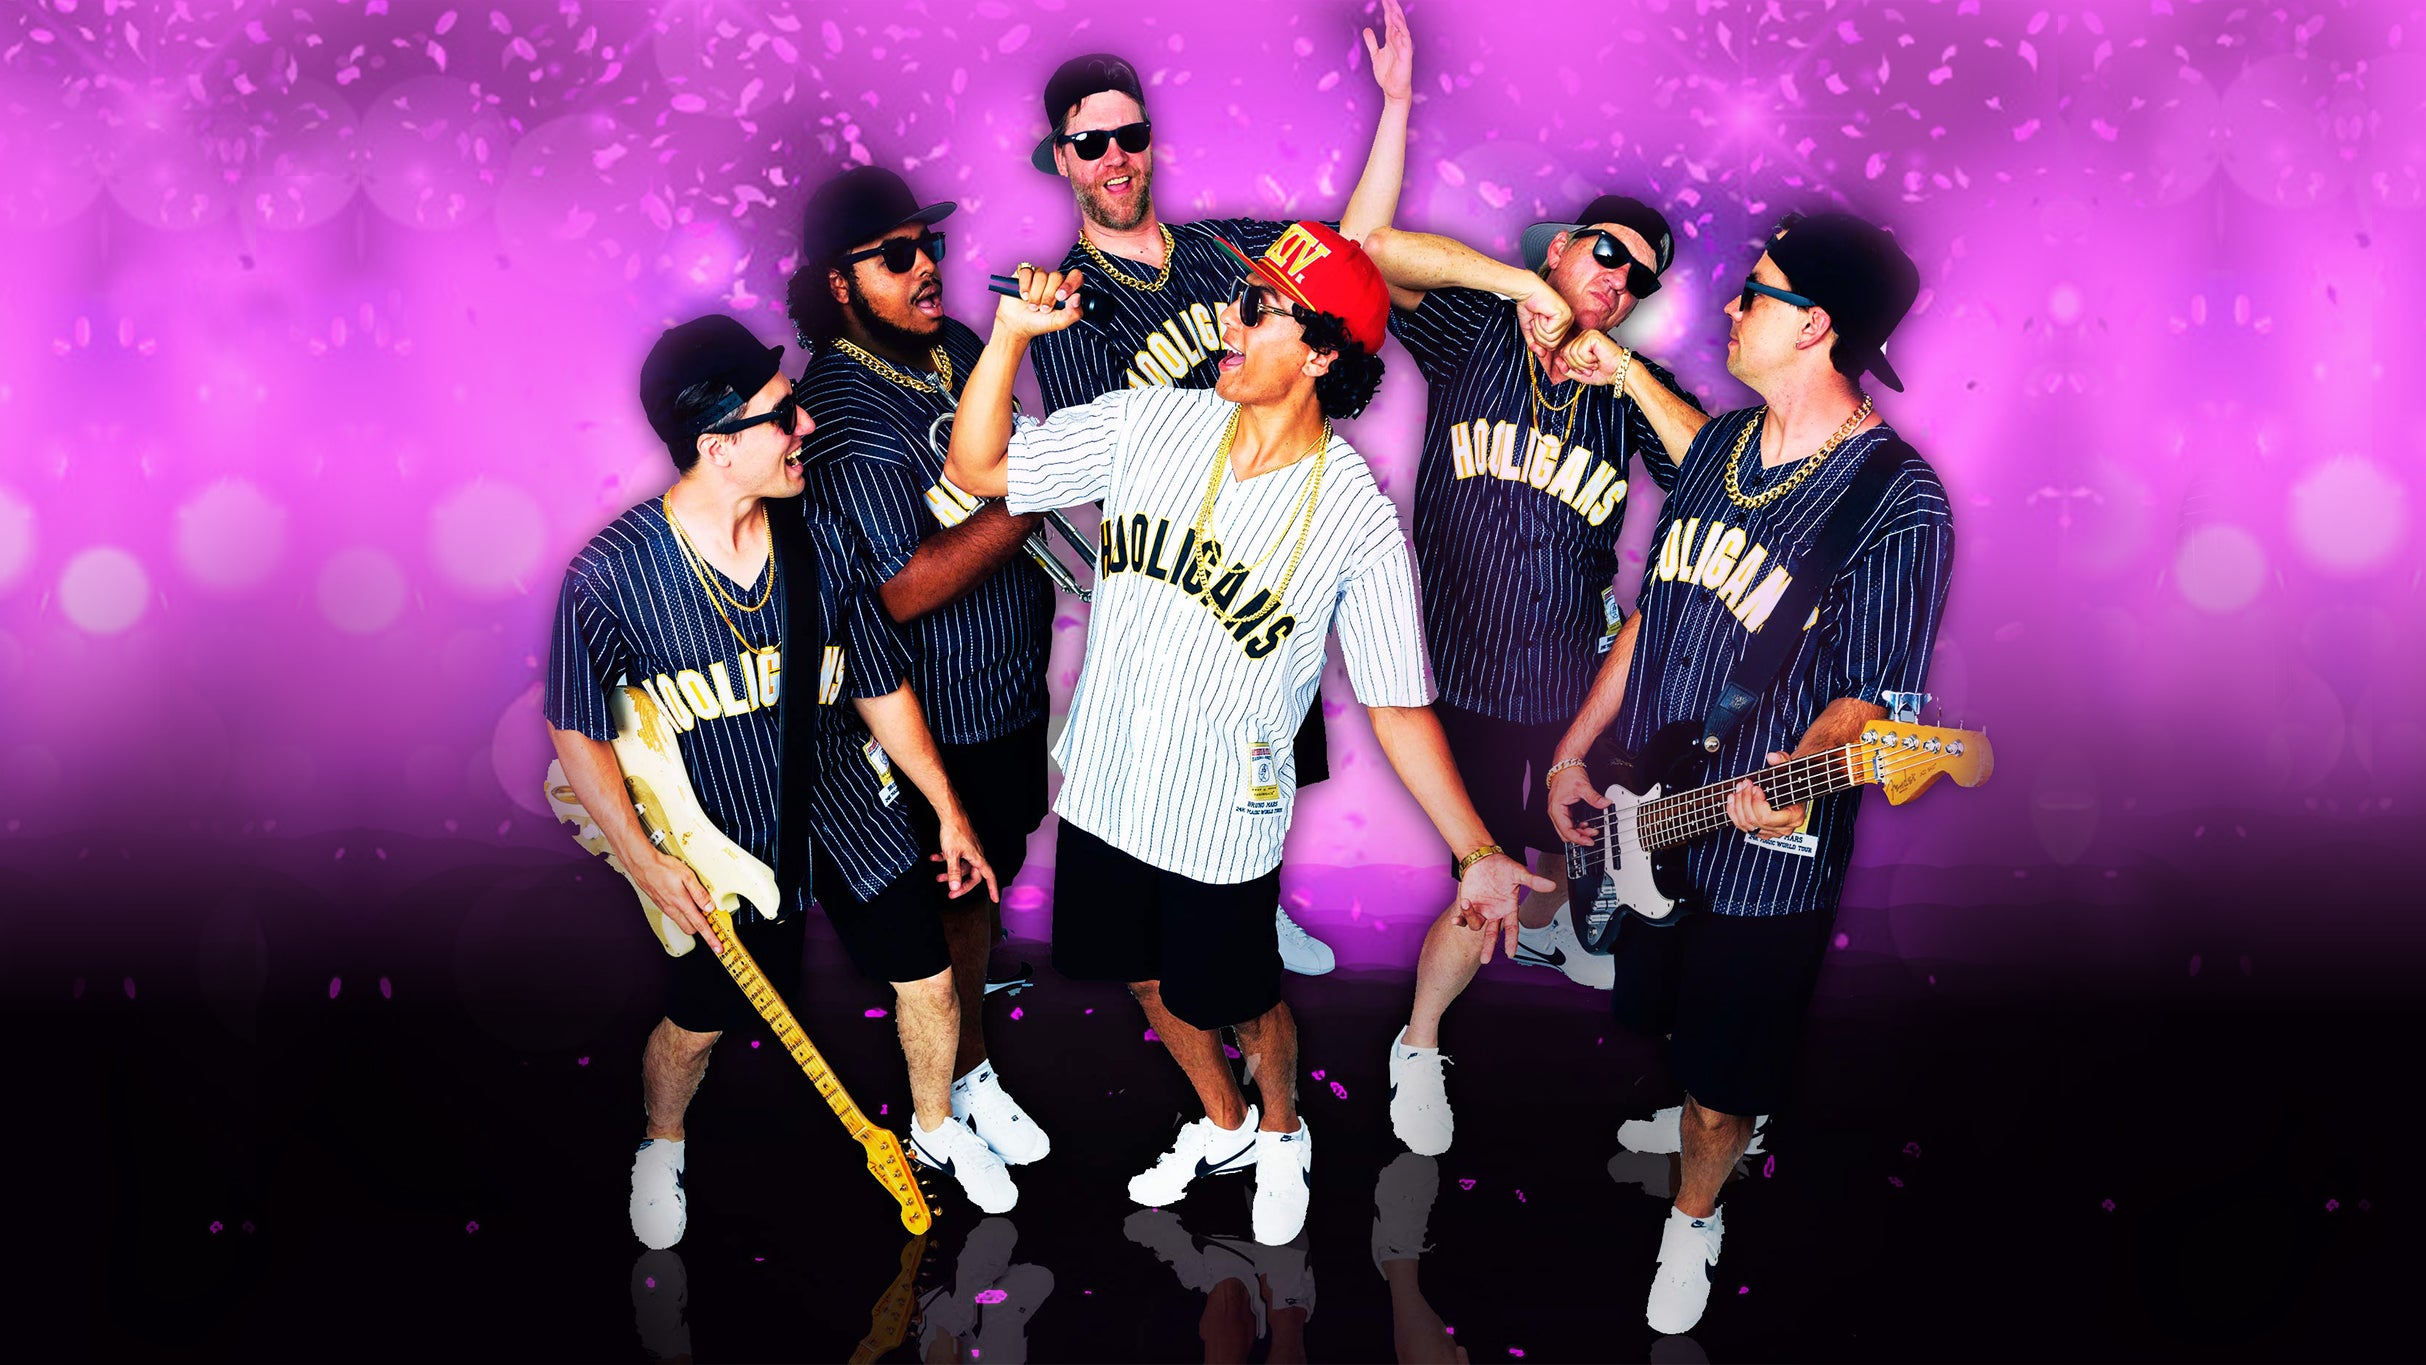 The Ultimate Bruno Mars Experience feat. 24K Magic